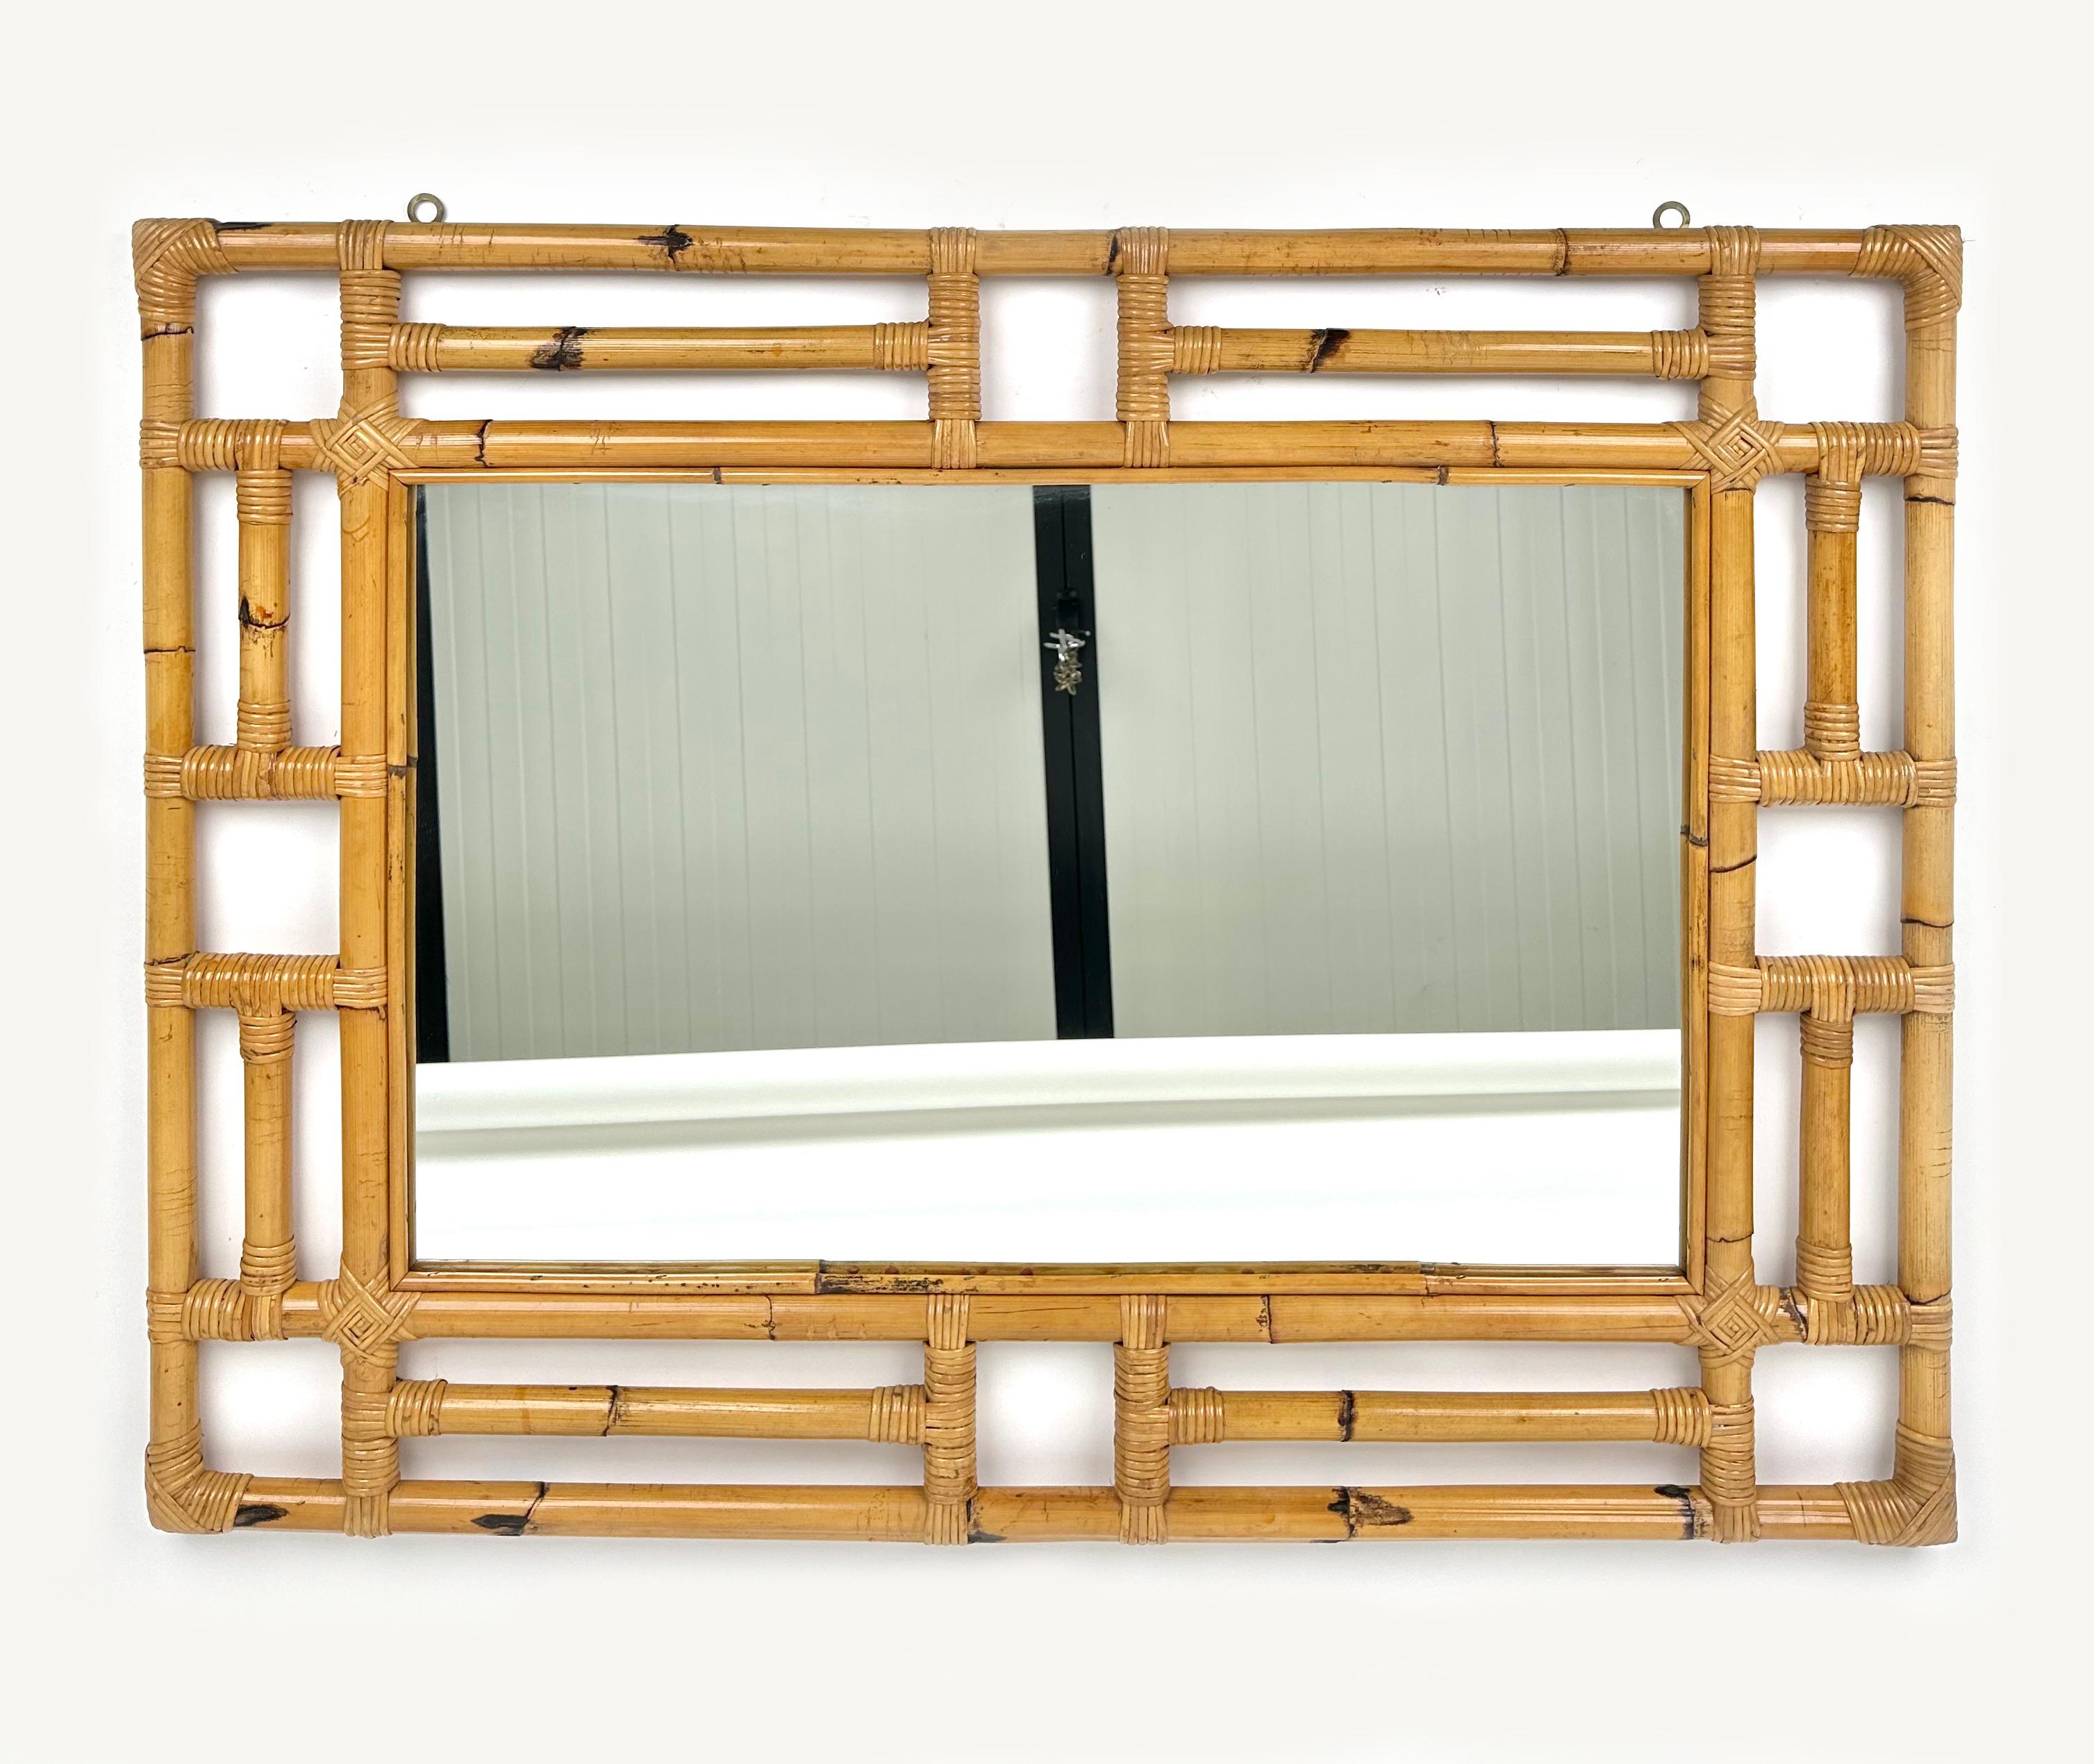 Rectangular wall mirror in rattan and bamboo in the style of Vivai del Sud.

Made in Italy in the 1970s.

Vivai Del Sud was a renowned brand in Roma in the 1960s and 1970s, inspired by Gabriella Crespi, bringing the mediteranean bamboo and